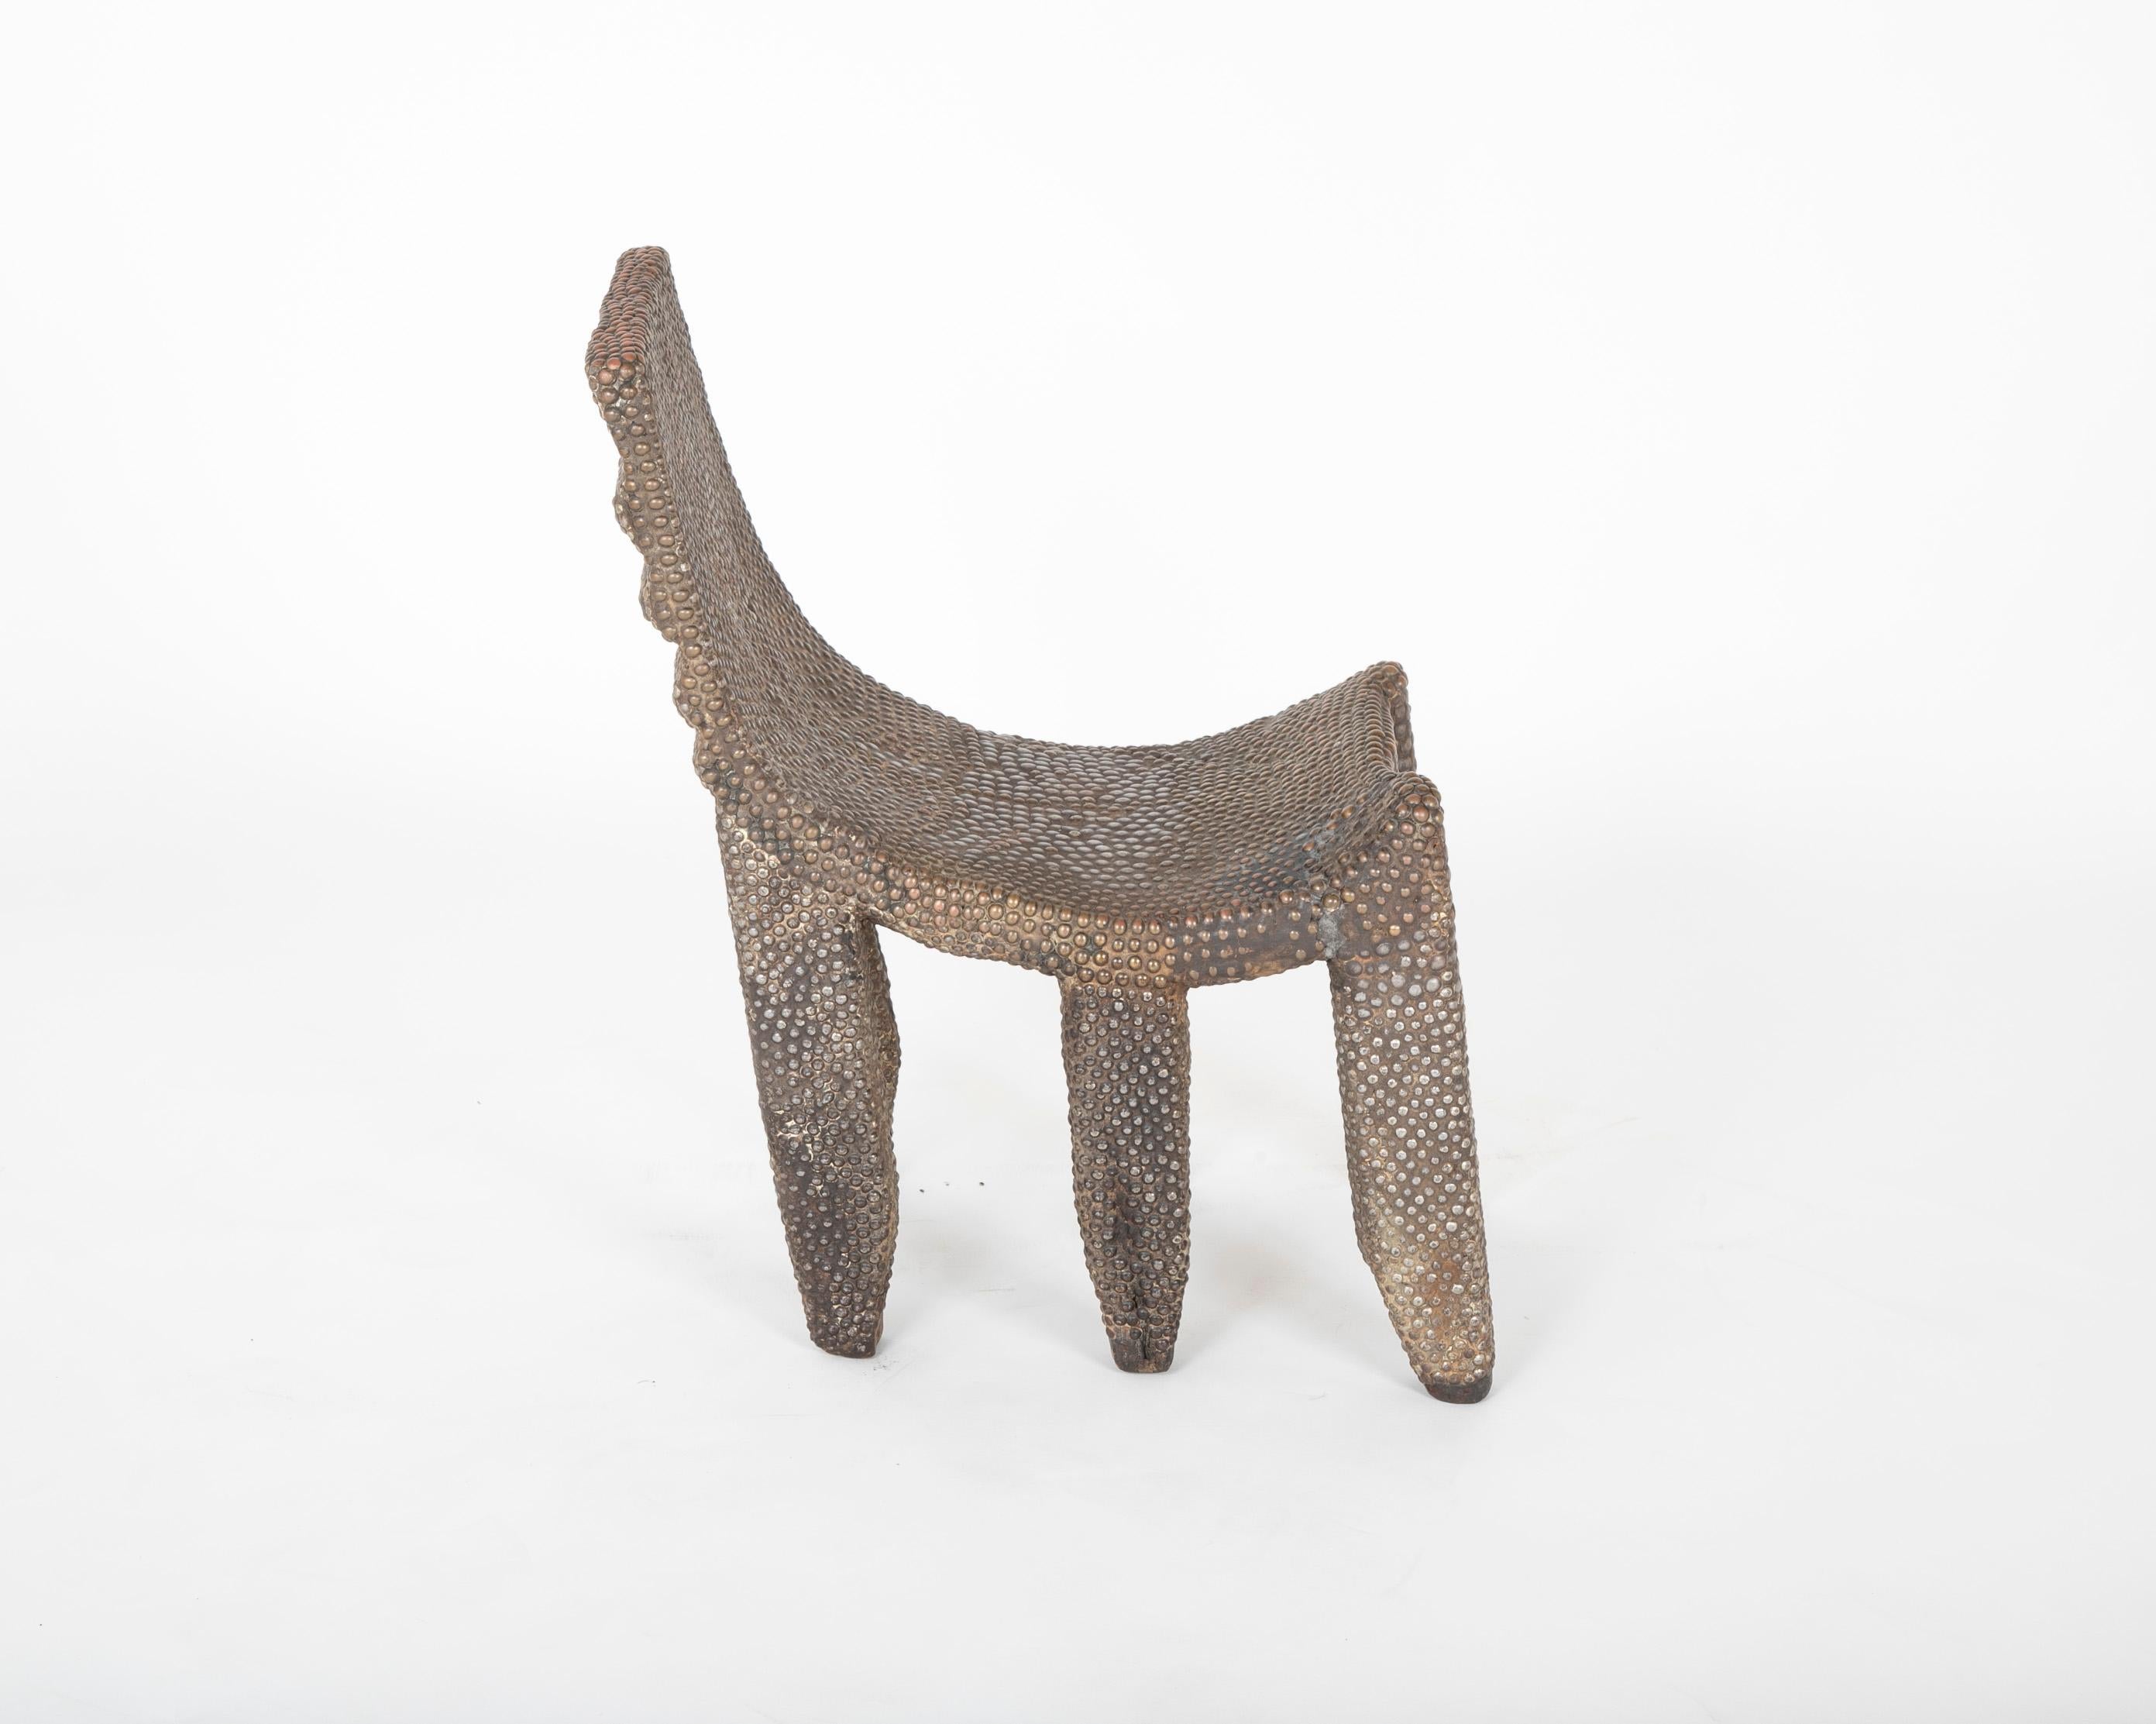 19th Century African Ngombe Studded Chair